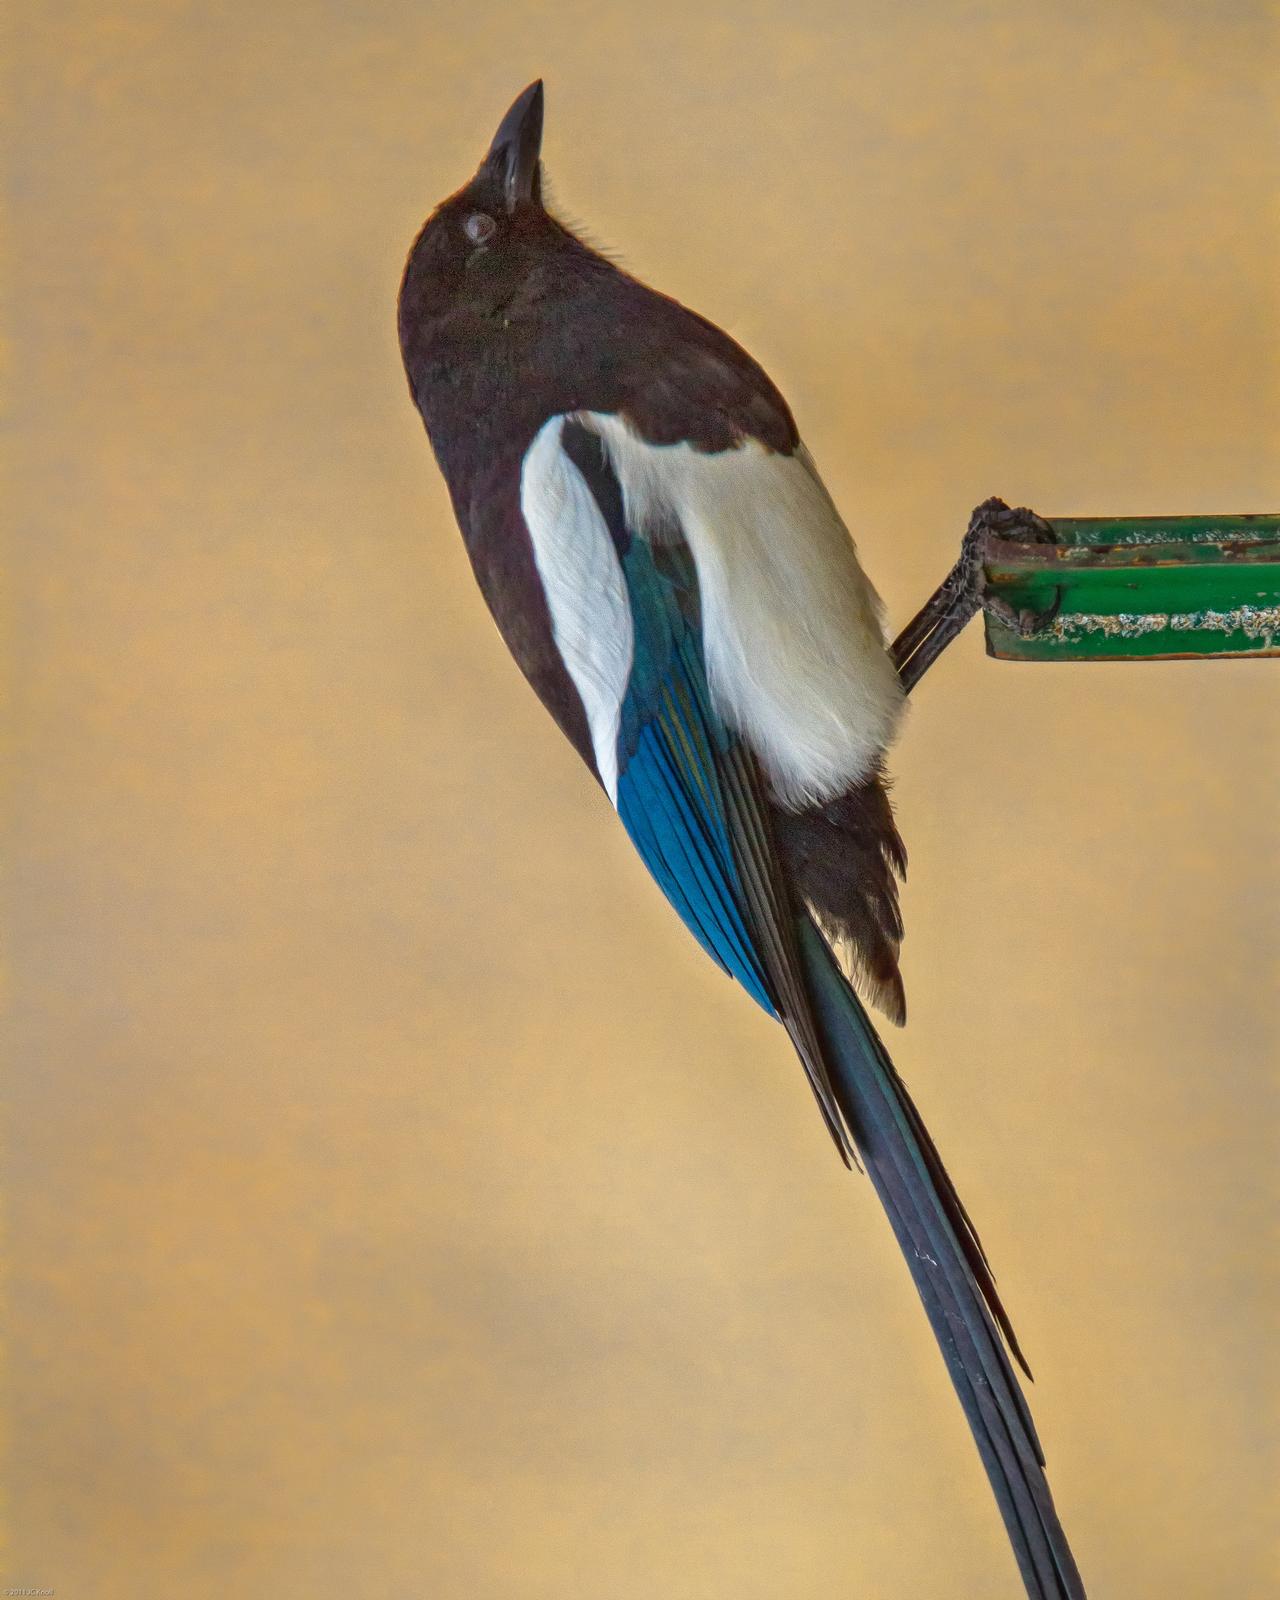 Black-billed Magpie Photo by JC Knoll